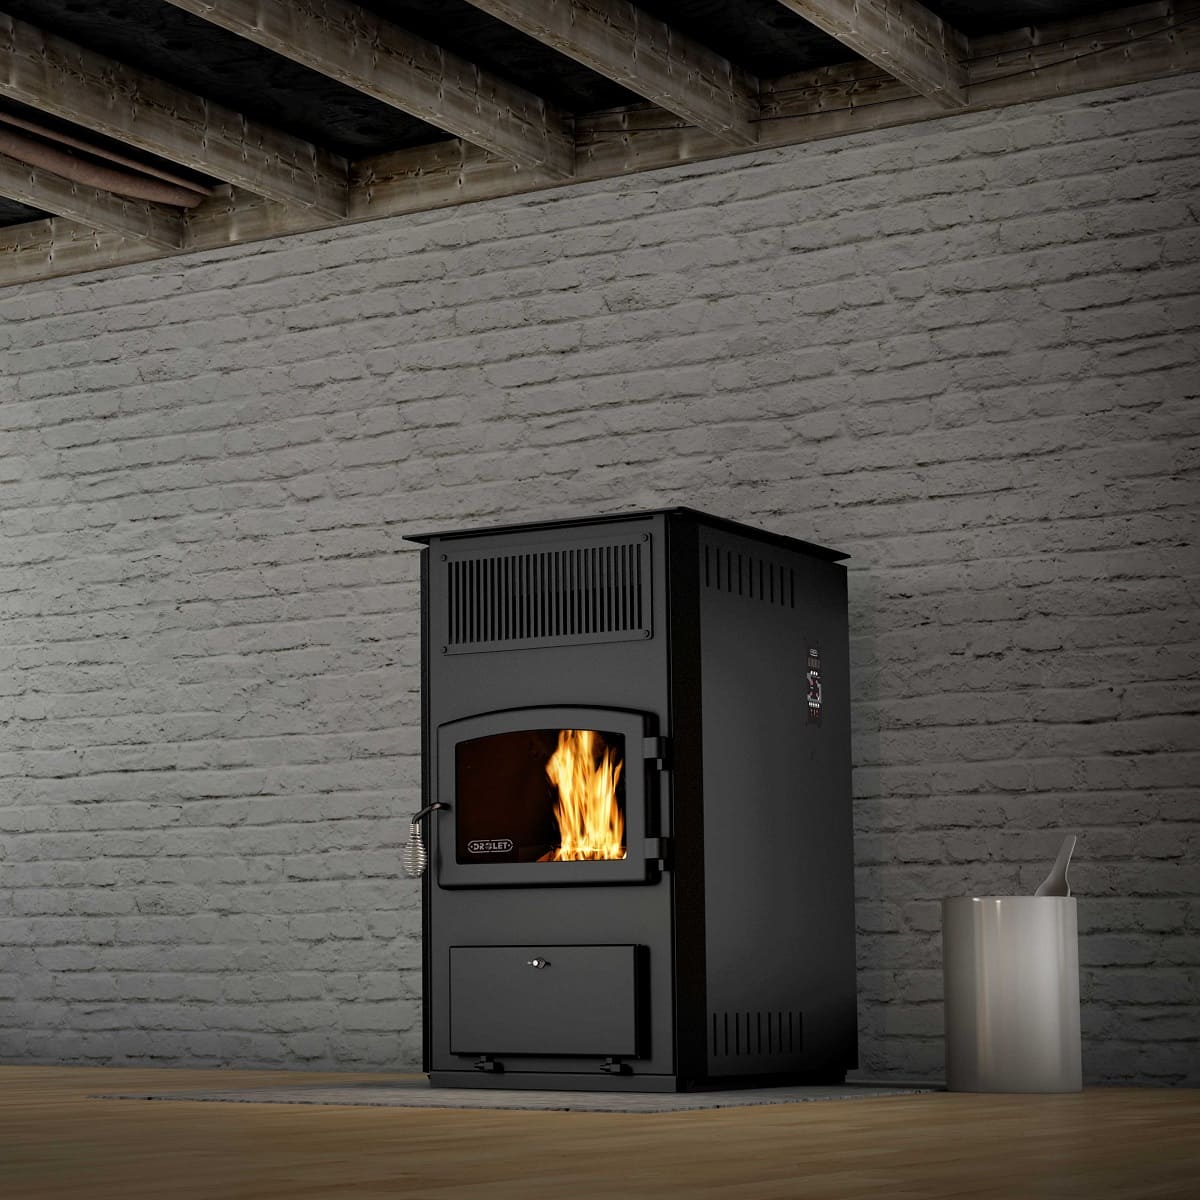 How To Install Pellet Stove In Basement